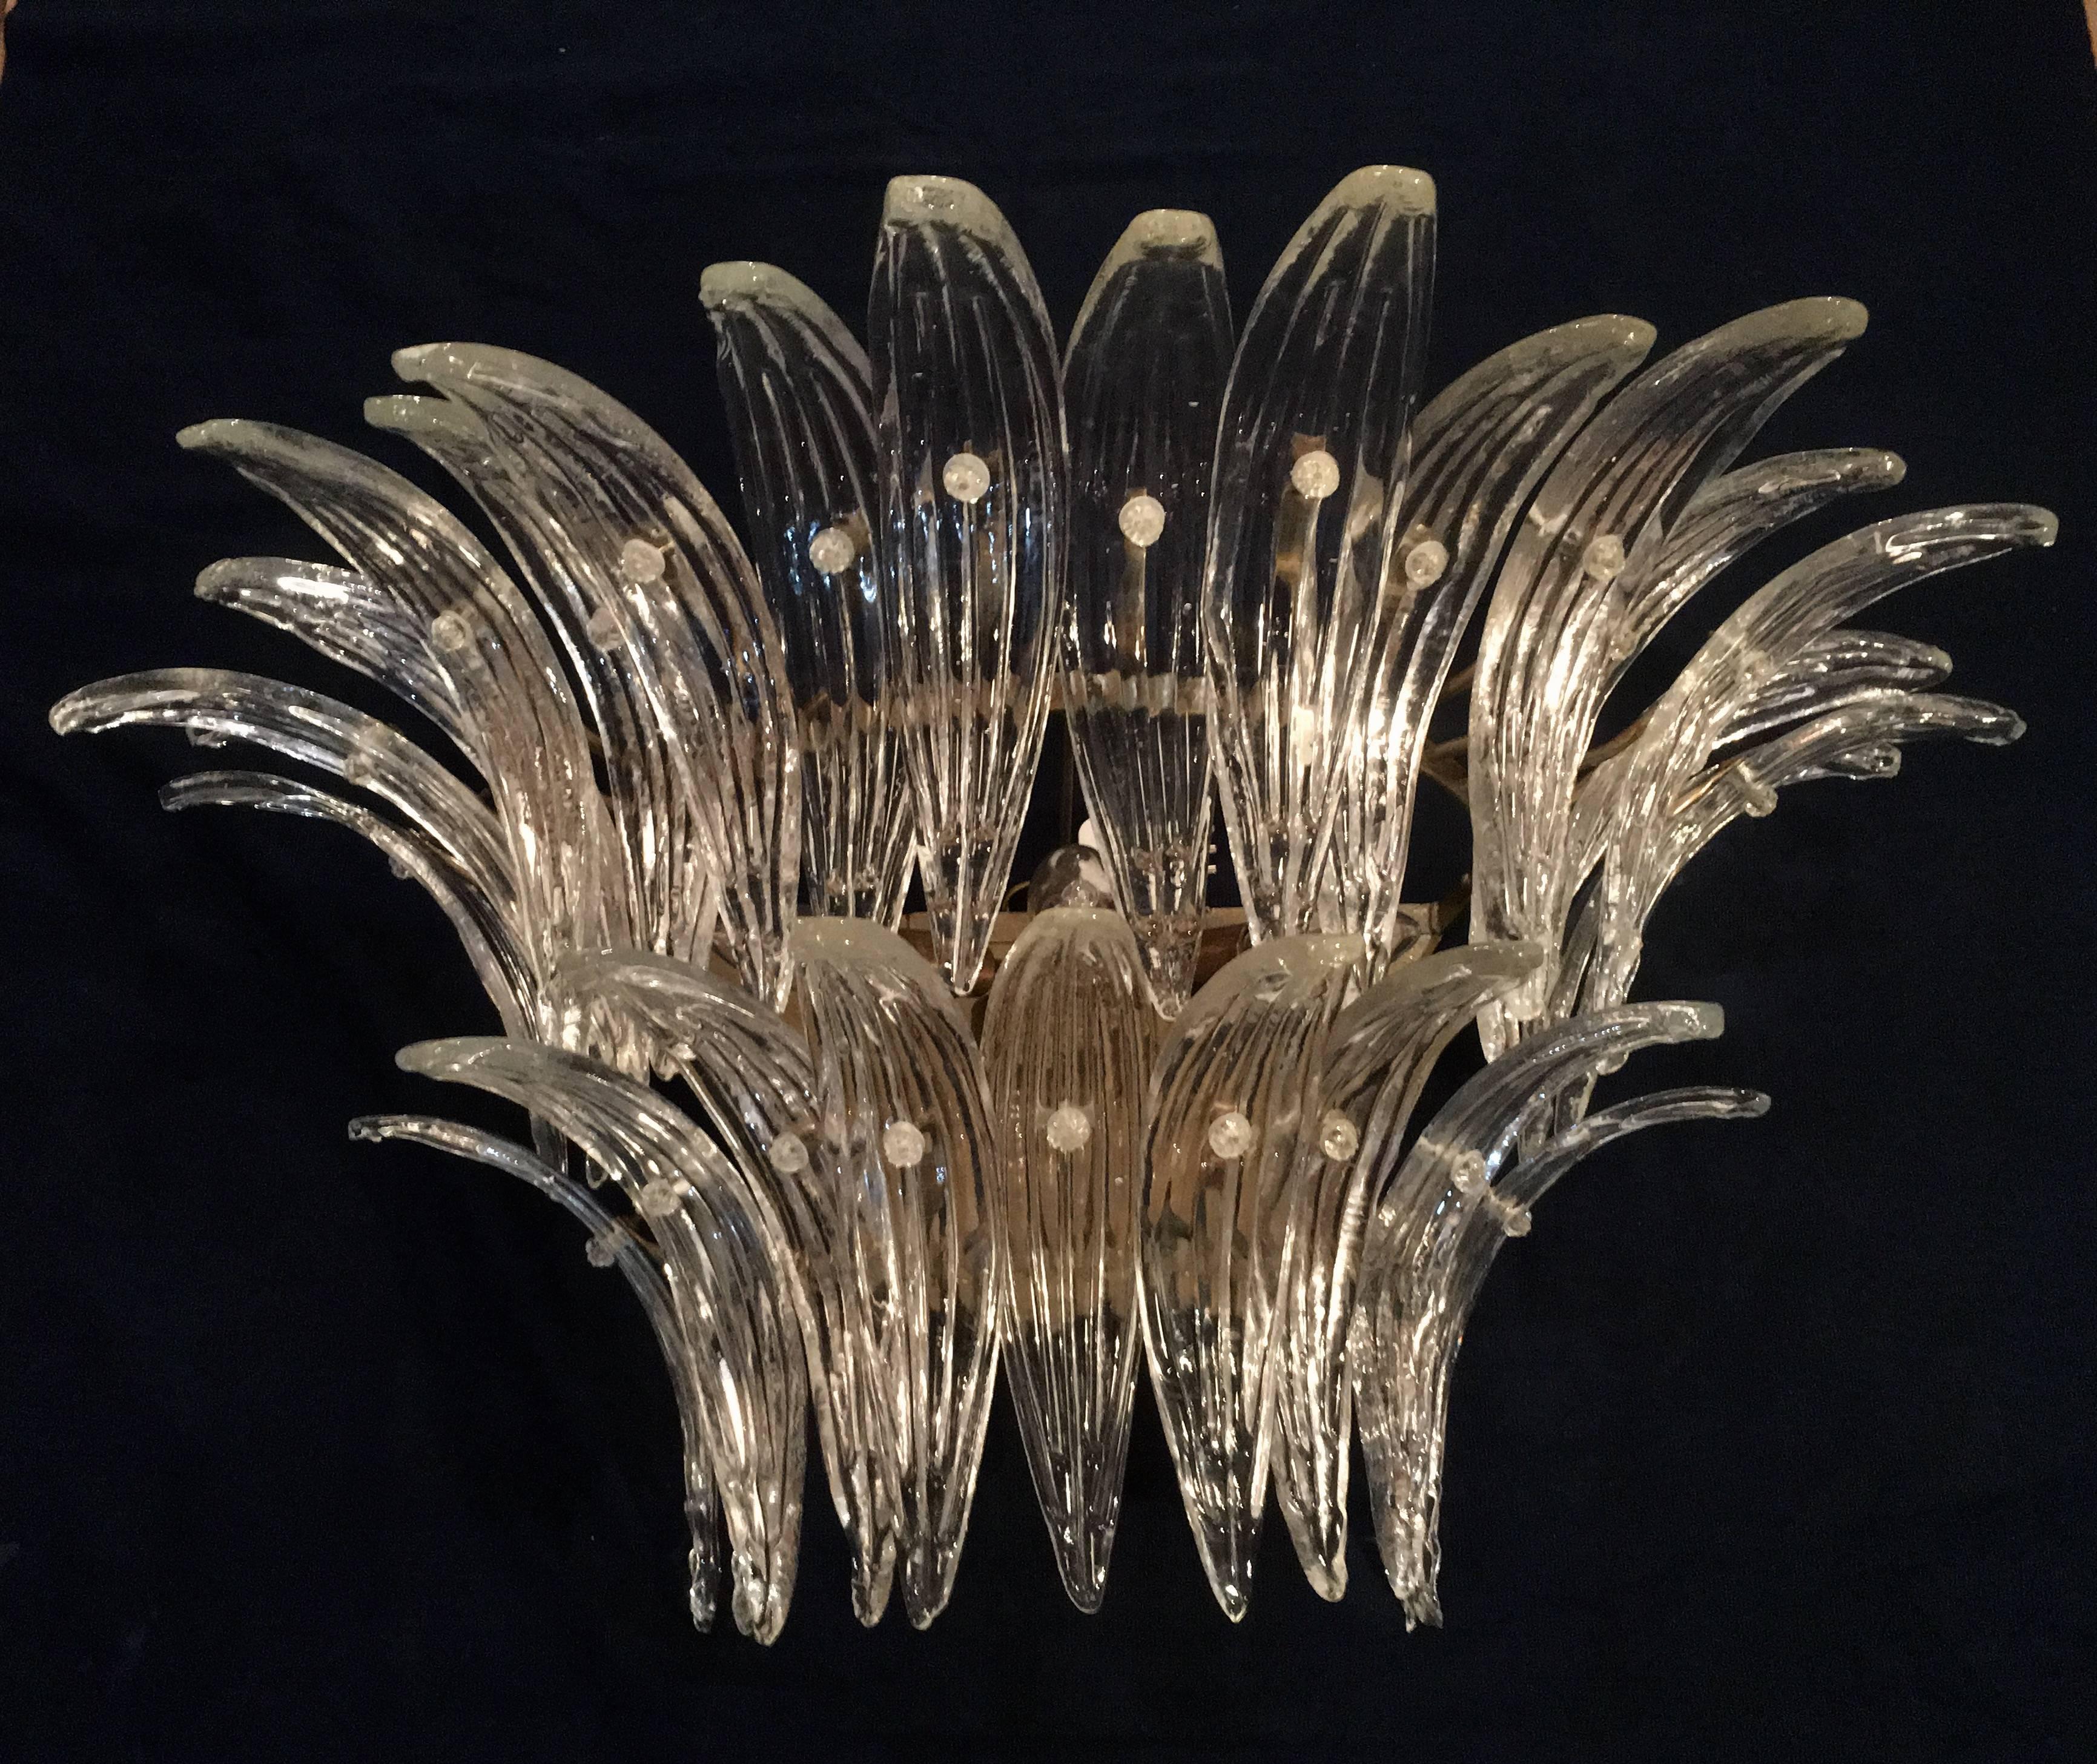 The sconces and chandeliers were located in the hall of a big hotel on the Amalfi Coast. Each individual sconce is composed by 29 large leaves in pure Murano glass. Available four pairs of sconces and two pairs of chandeliers.